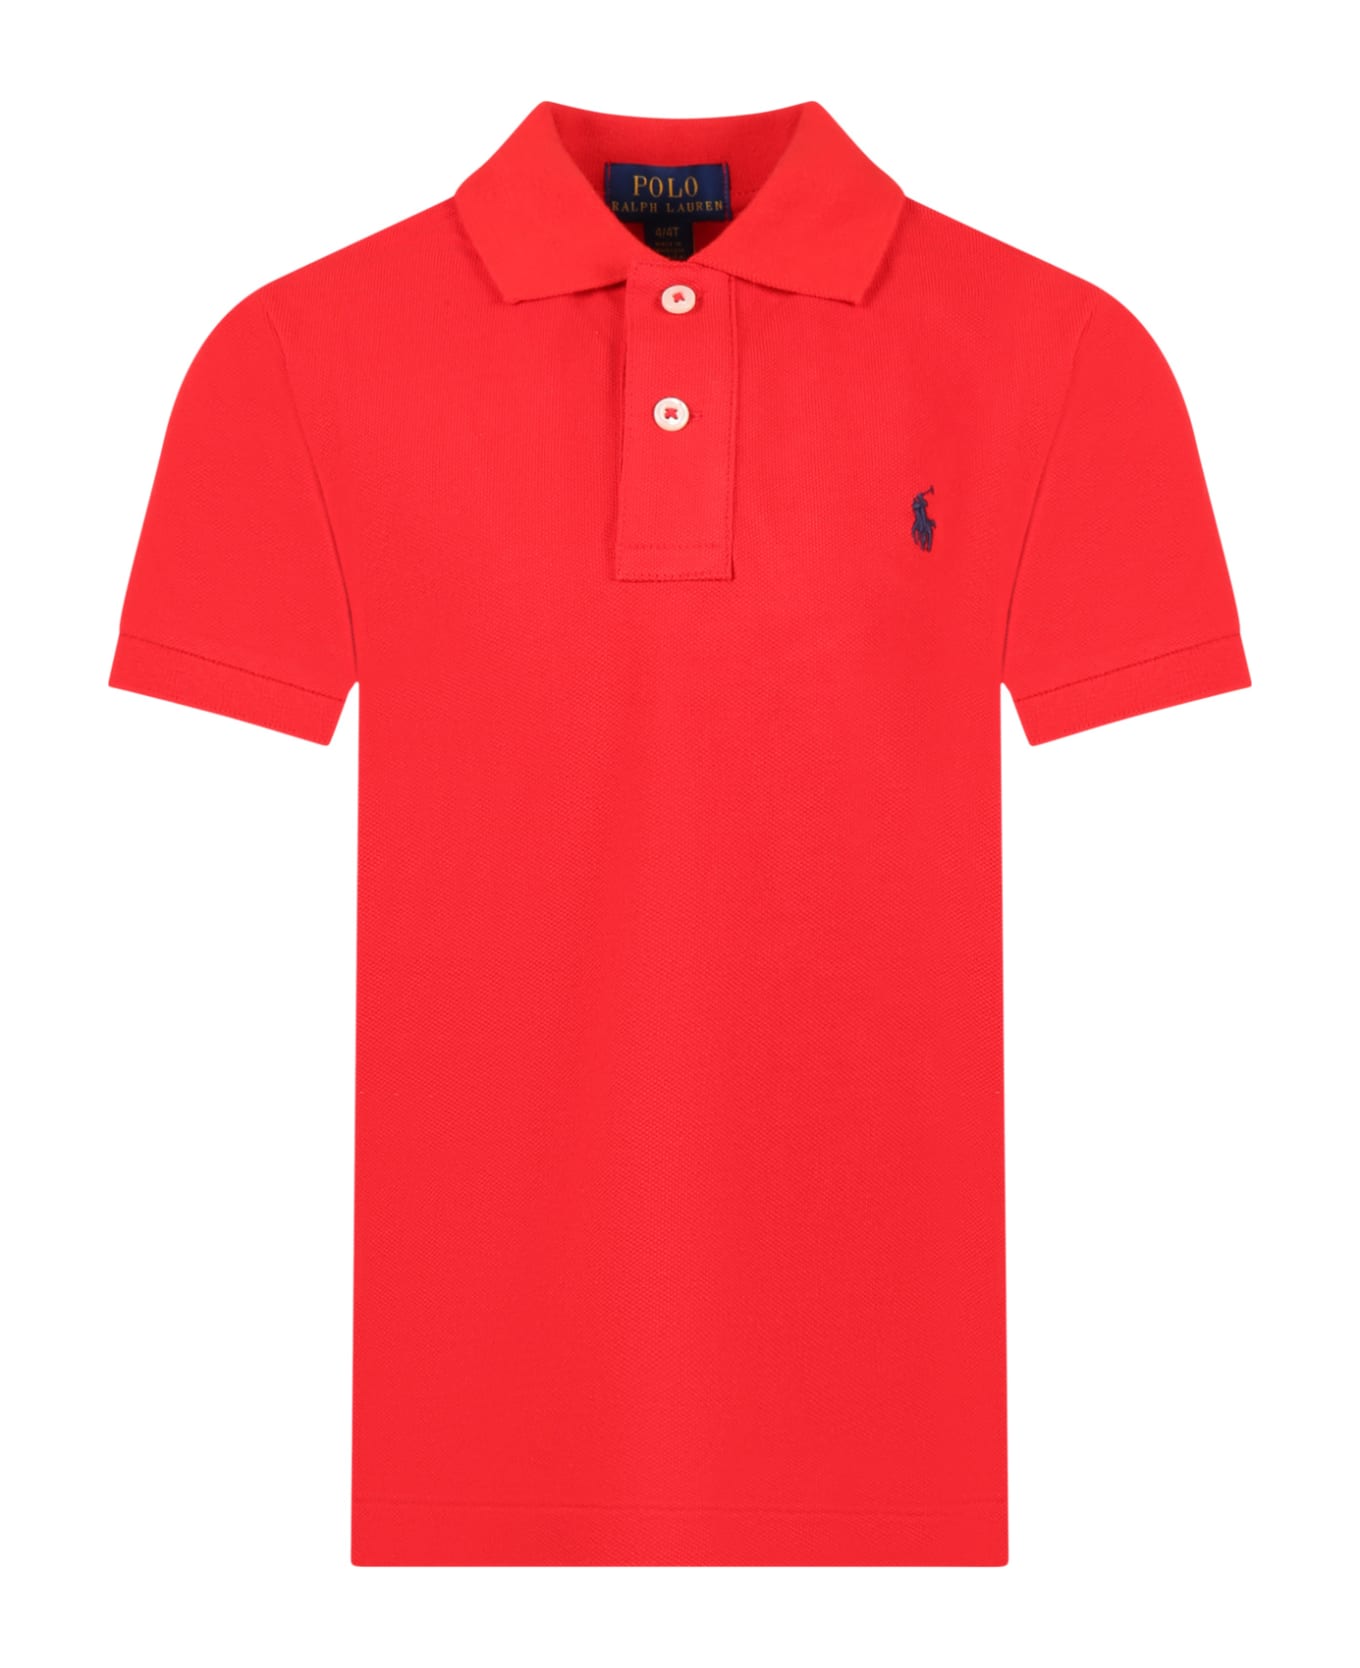 Ralph Lauren Red Polo Shirt For Boy With Blue Pony - Red